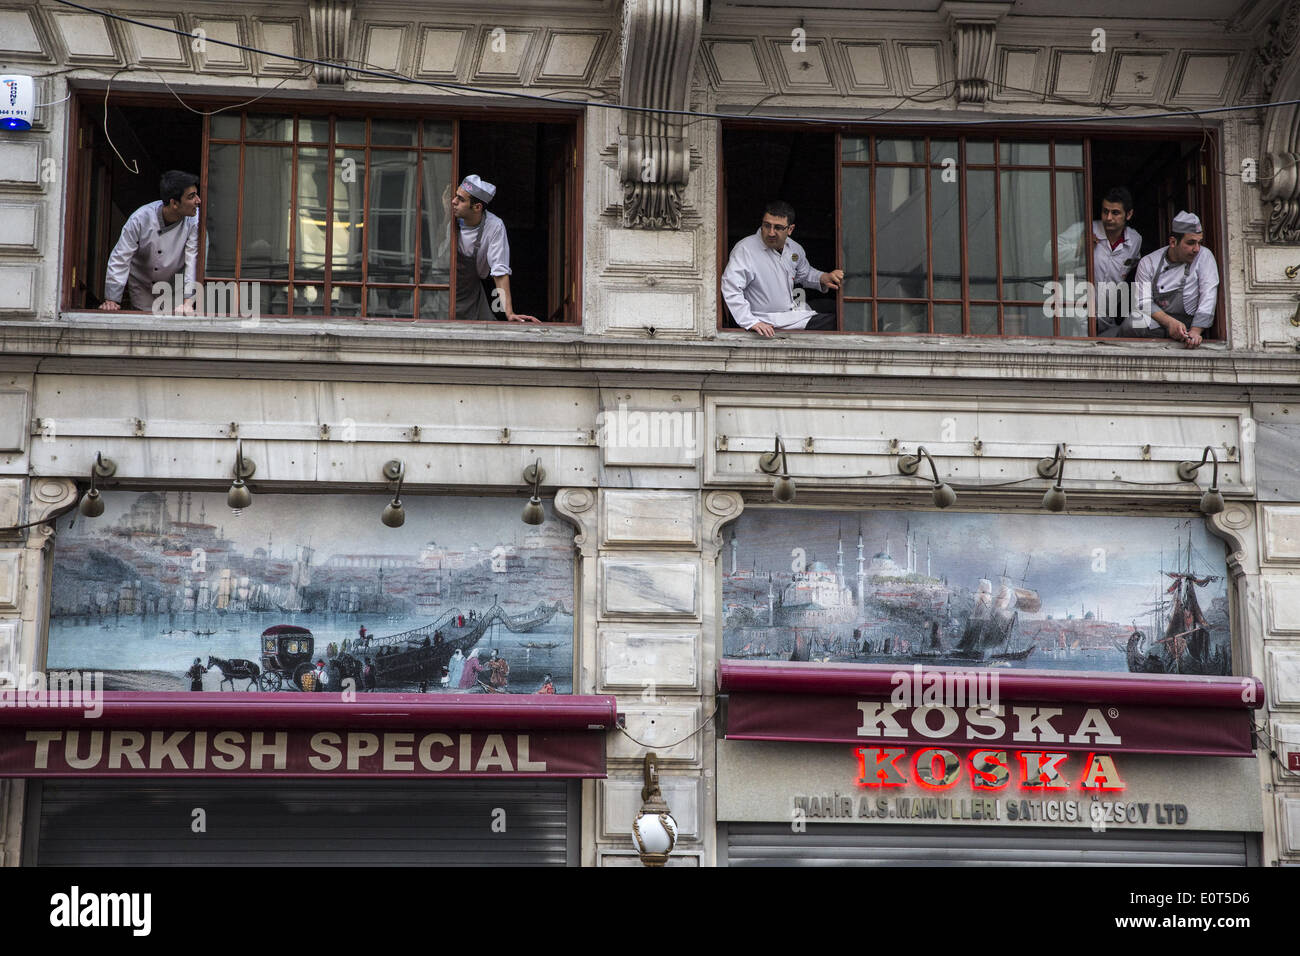 Istanbul, Turkey. 17th May, 2014. Workers at the Turkish candy company Koska watch as protesters clash with police in Istanbul on May 17, 2014. Anger has been mounting across the country regarding the government's handling and responsibility in the Soma mine accident, the worst in Turkey's history, which killed at least 300 miners. PHOTO BY JODI HILTON/NURPHOTO © Jodi Hilton/NurPhoto/ZUMAPRESS.com/Alamy Live News Stock Photo